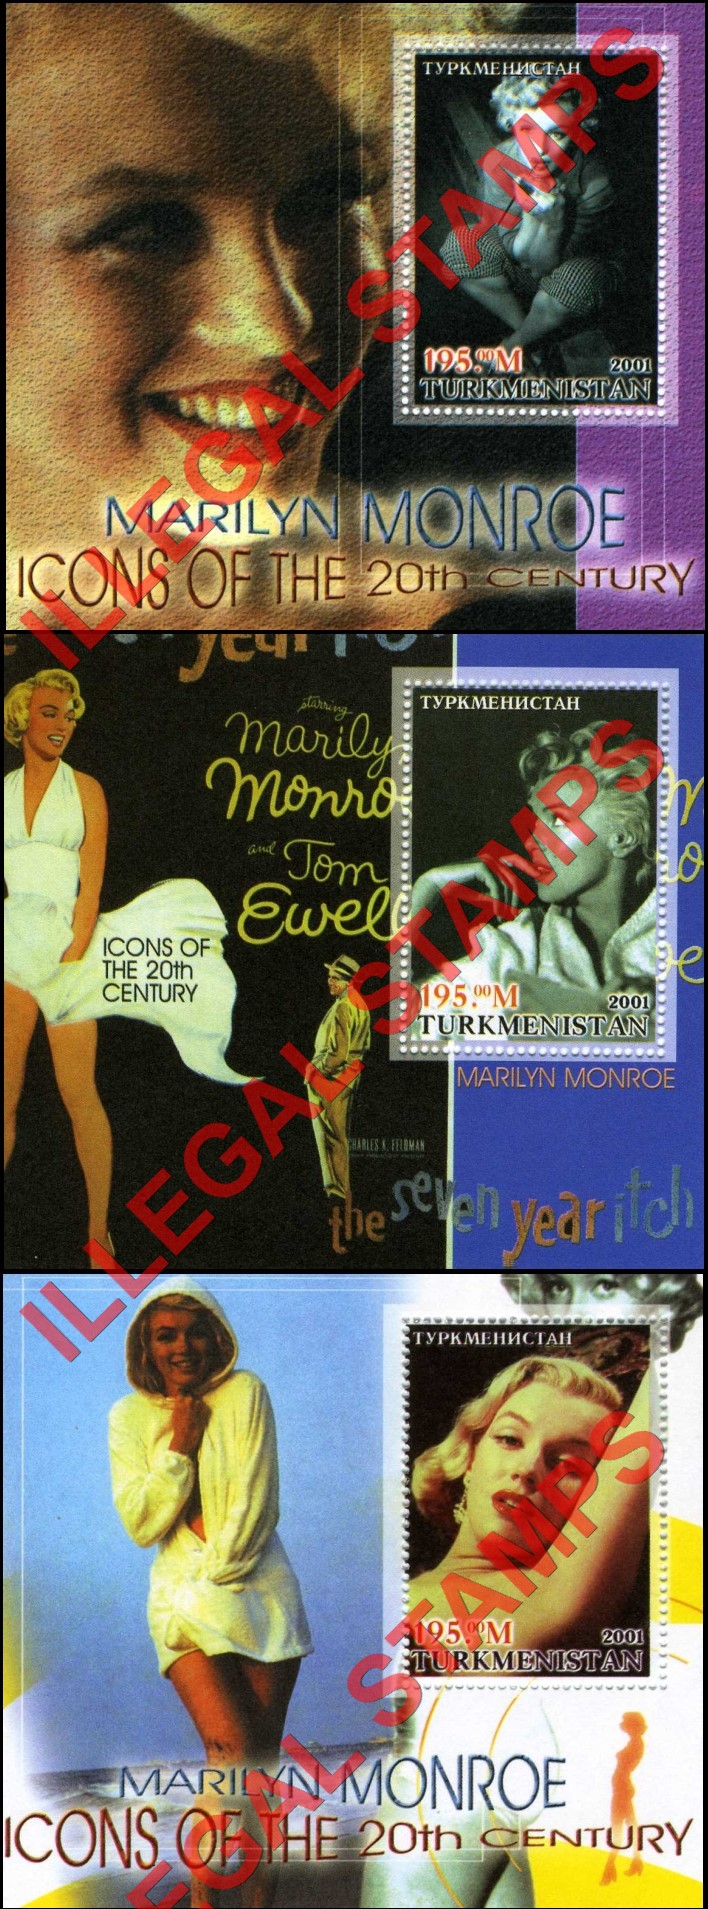 Turkmenistan 2001 Icons of the 20th Century Marilyn Monroe Illegal Stamp Souvenir Sheets of 1